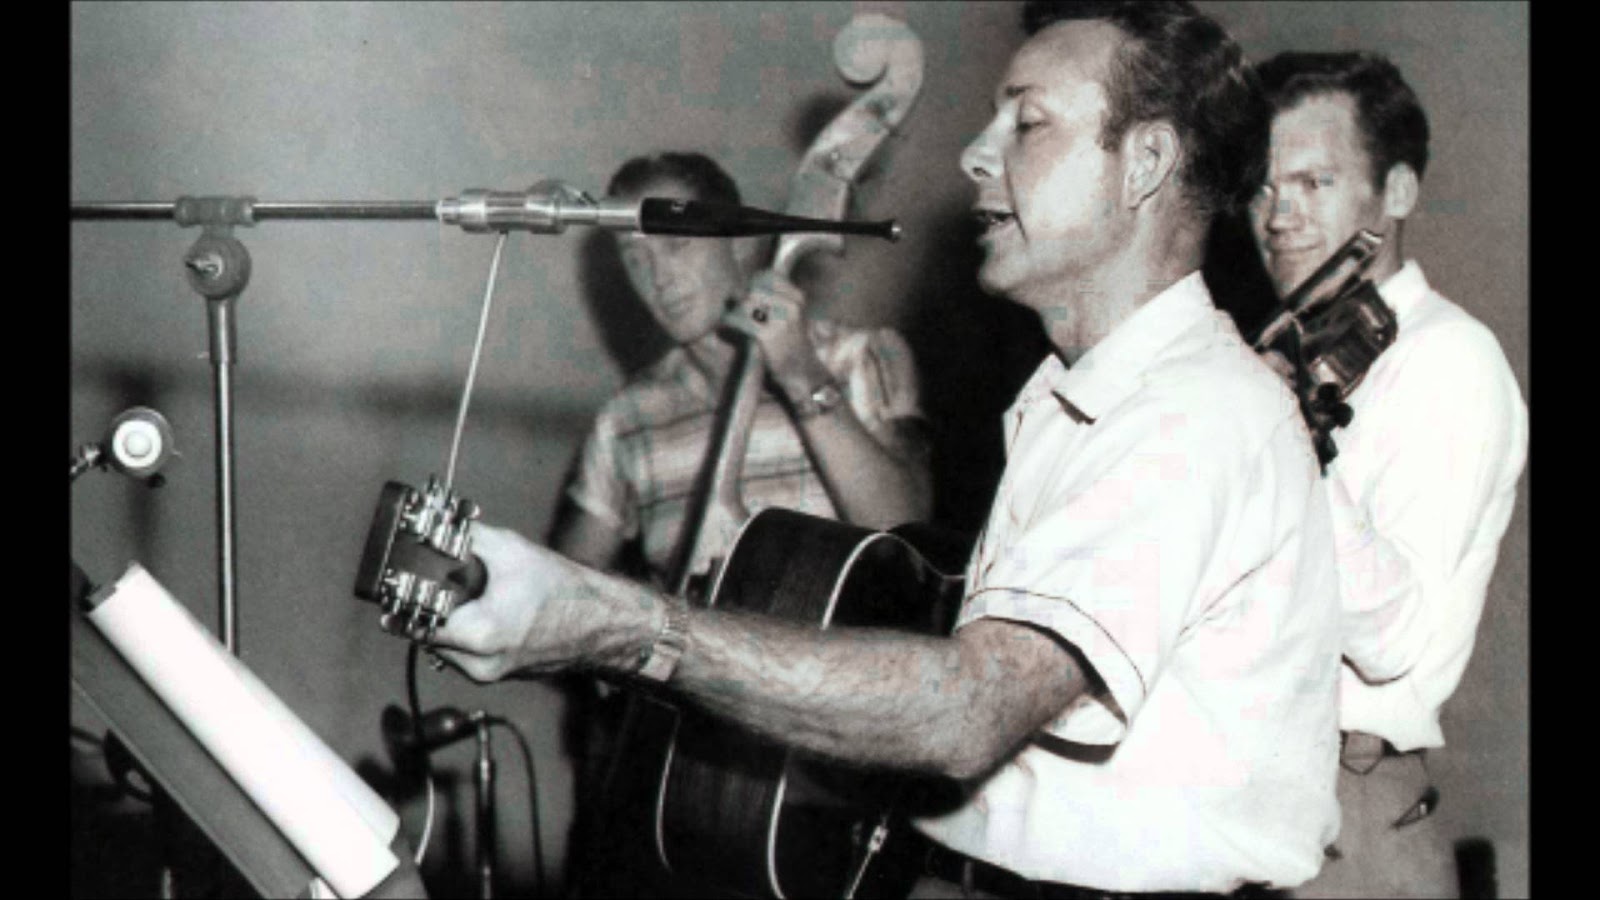 FROM THE VAULTS: Jim Reeves born 20 August 1923